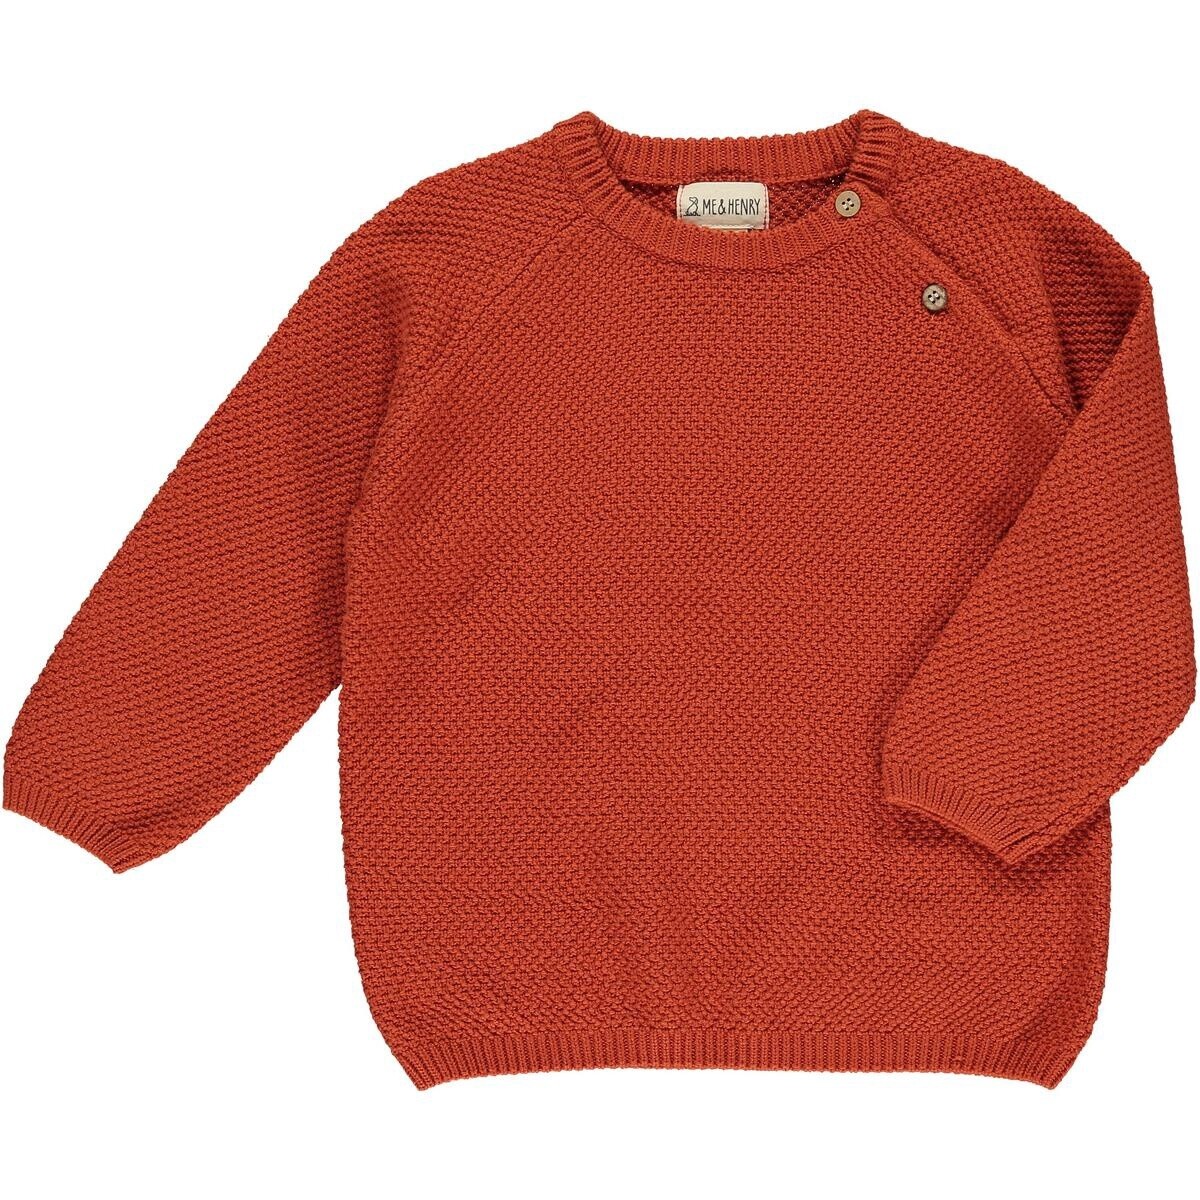 Roan Toddler Sweater, Colour: Rust, Size: 2-3Y